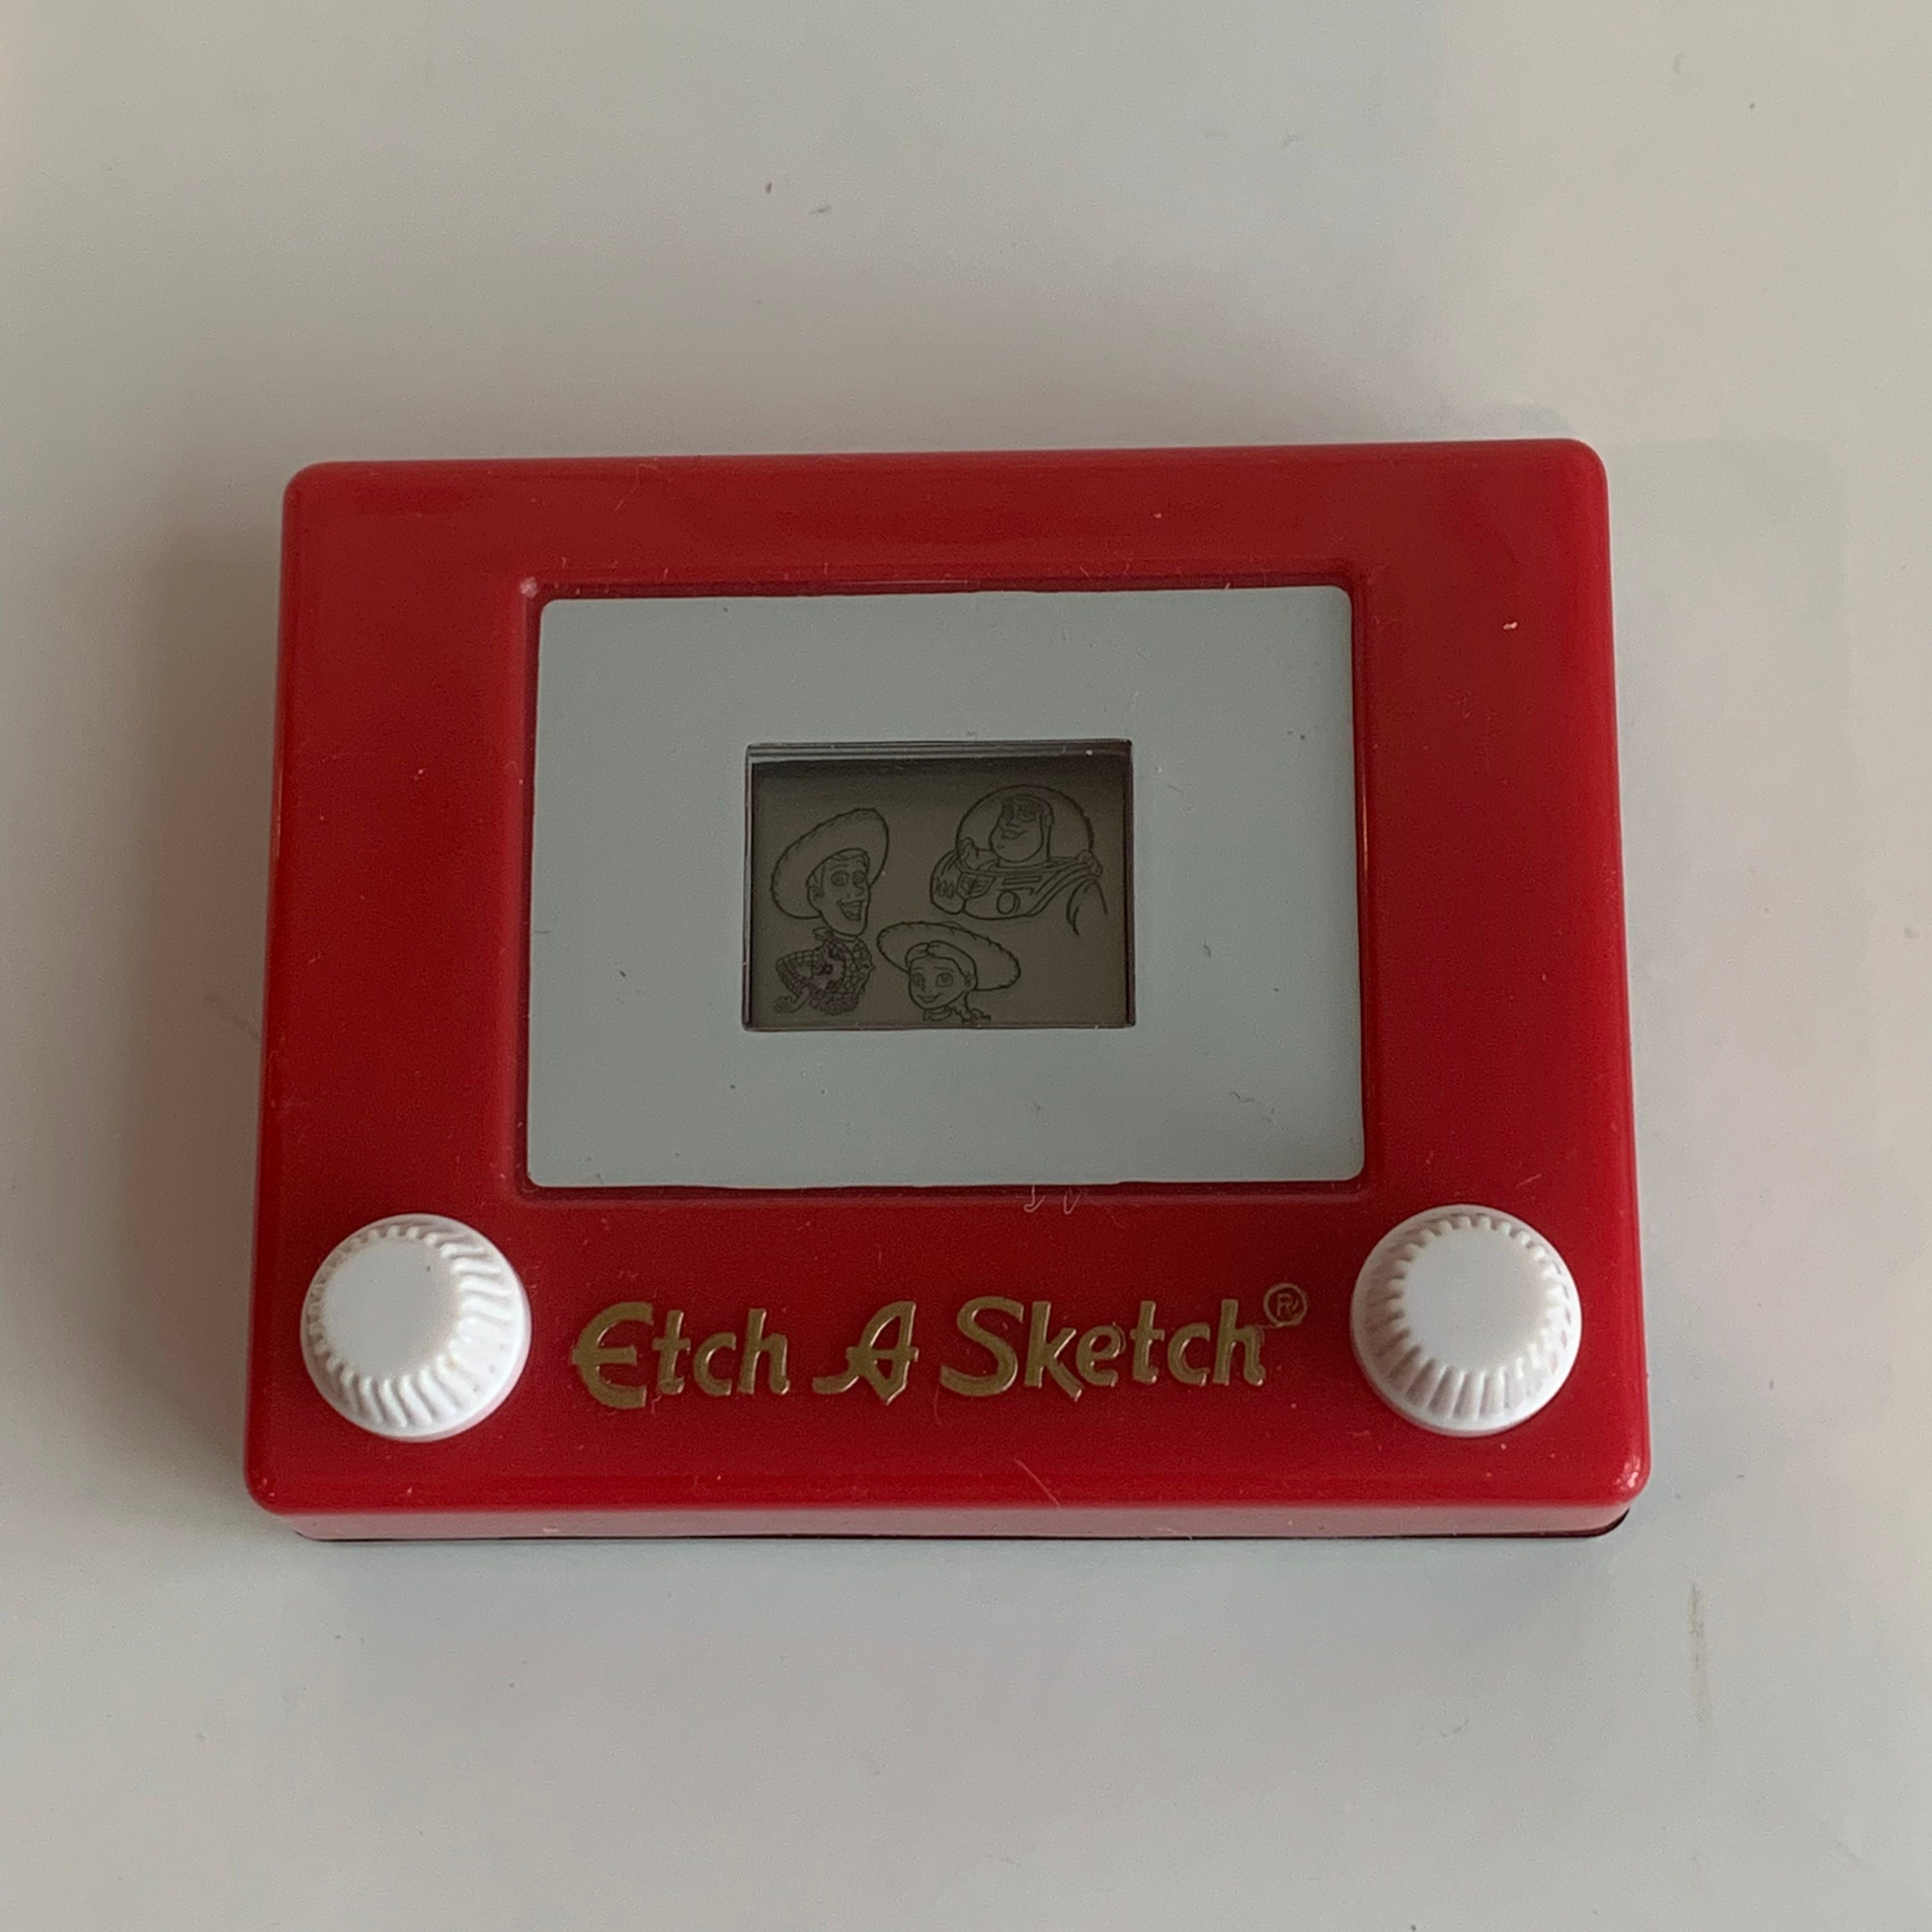 Vintage Mini Etch a Sketch Featuring Walt Disney's Toy Story Characters -   Sweden